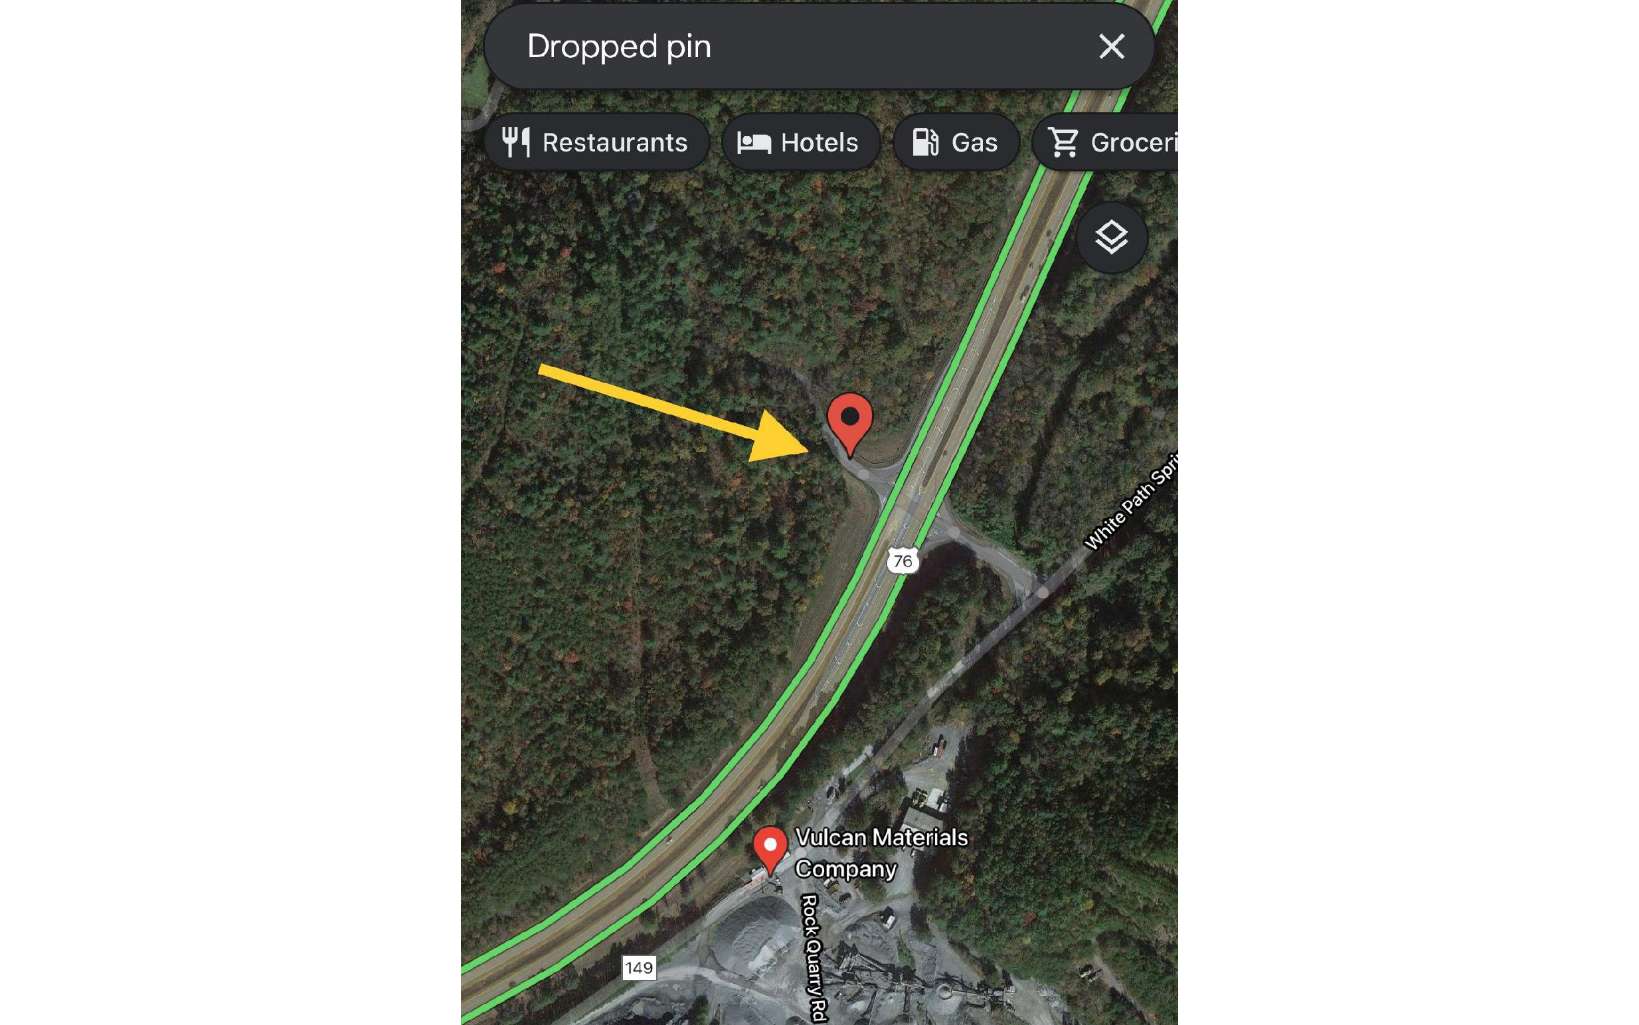 17.13 Acres HWY 515 1552 Ft of highway frontage OVER 20,000 CARS PER DAY PASS BY. THIS HAS NORTH AND SOUTH BOUND ACCESS ON HWY 515 with full median break including DECELERATION LANES, ON SOUTH BOUND SIDE GA DOT APPROVED. CORNER OF HWY 515 AND WHITE PATH SPINGS ROAD. ELECTRIC ON PROPERTY Rapidly growing area between Ellijay, Cherry Log and Blue Ridge. 2 PARCELS BEING SOLD TOGETHER. 10 Acre Tract Parcel 3107 020D & 7 Acre Tract 3107 020B. This would be a GREAT Investment or Future Site for Shopping Center, auto dealership, or any business that needs easy in and out access with visibility. One of the owners is GA licensed Real Estate Agent. Electric on property. Surveys available Property is currently zoned Agriculture and Sellers will assist buyer for rezoning if needed.